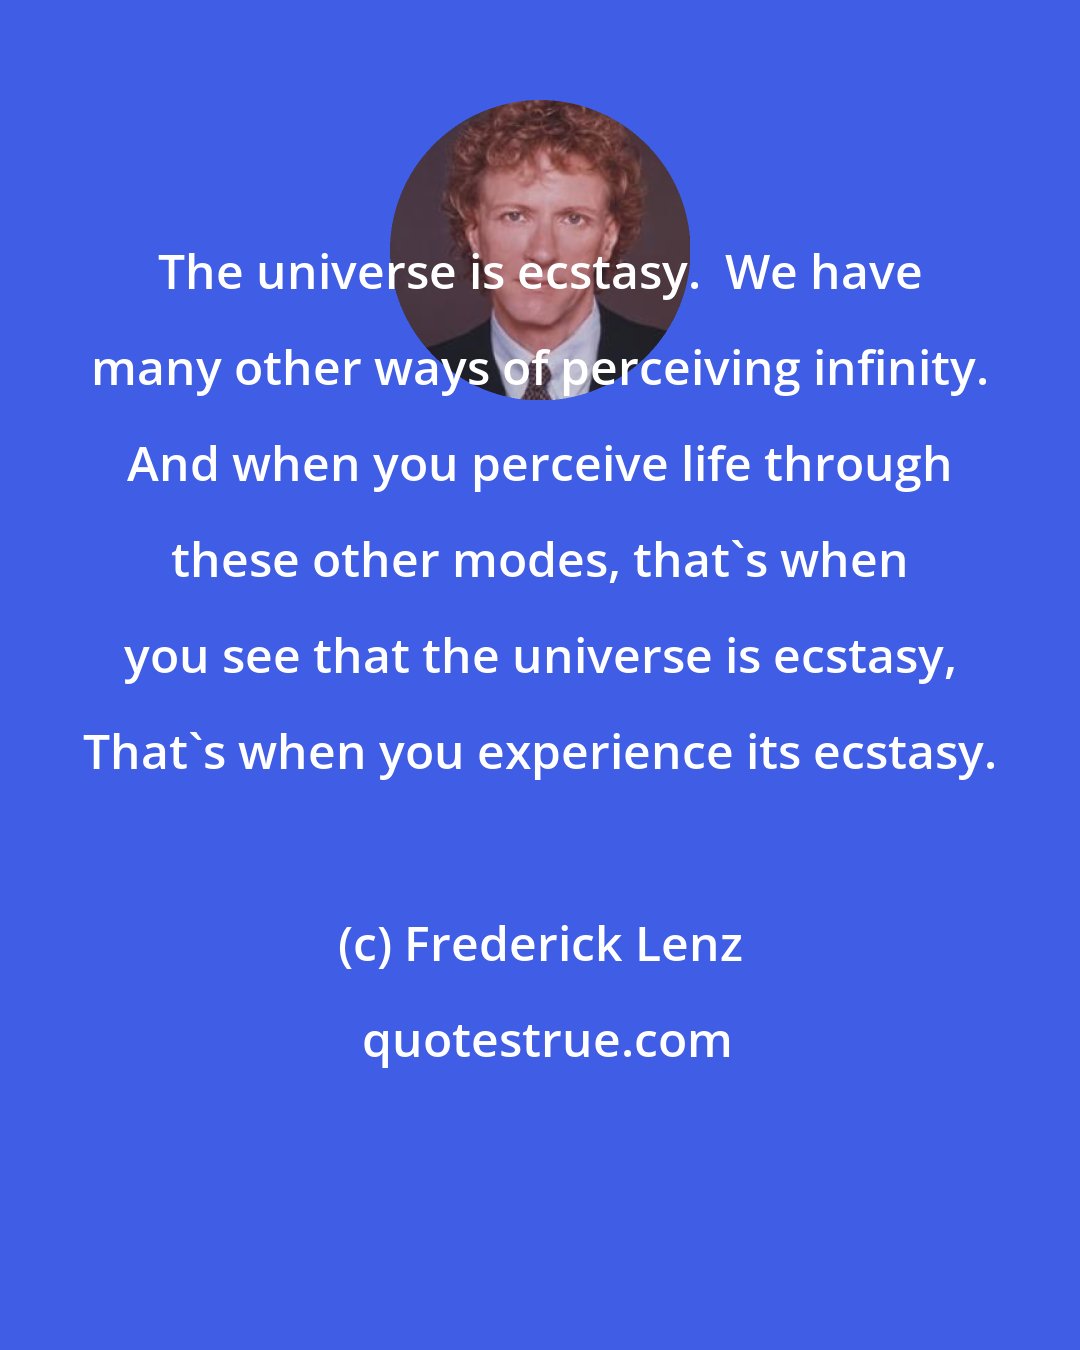 Frederick Lenz: The universe is ecstasy.  We have many other ways of perceiving infinity. And when you perceive life through these other modes, that's when you see that the universe is ecstasy, That's when you experience its ecstasy.